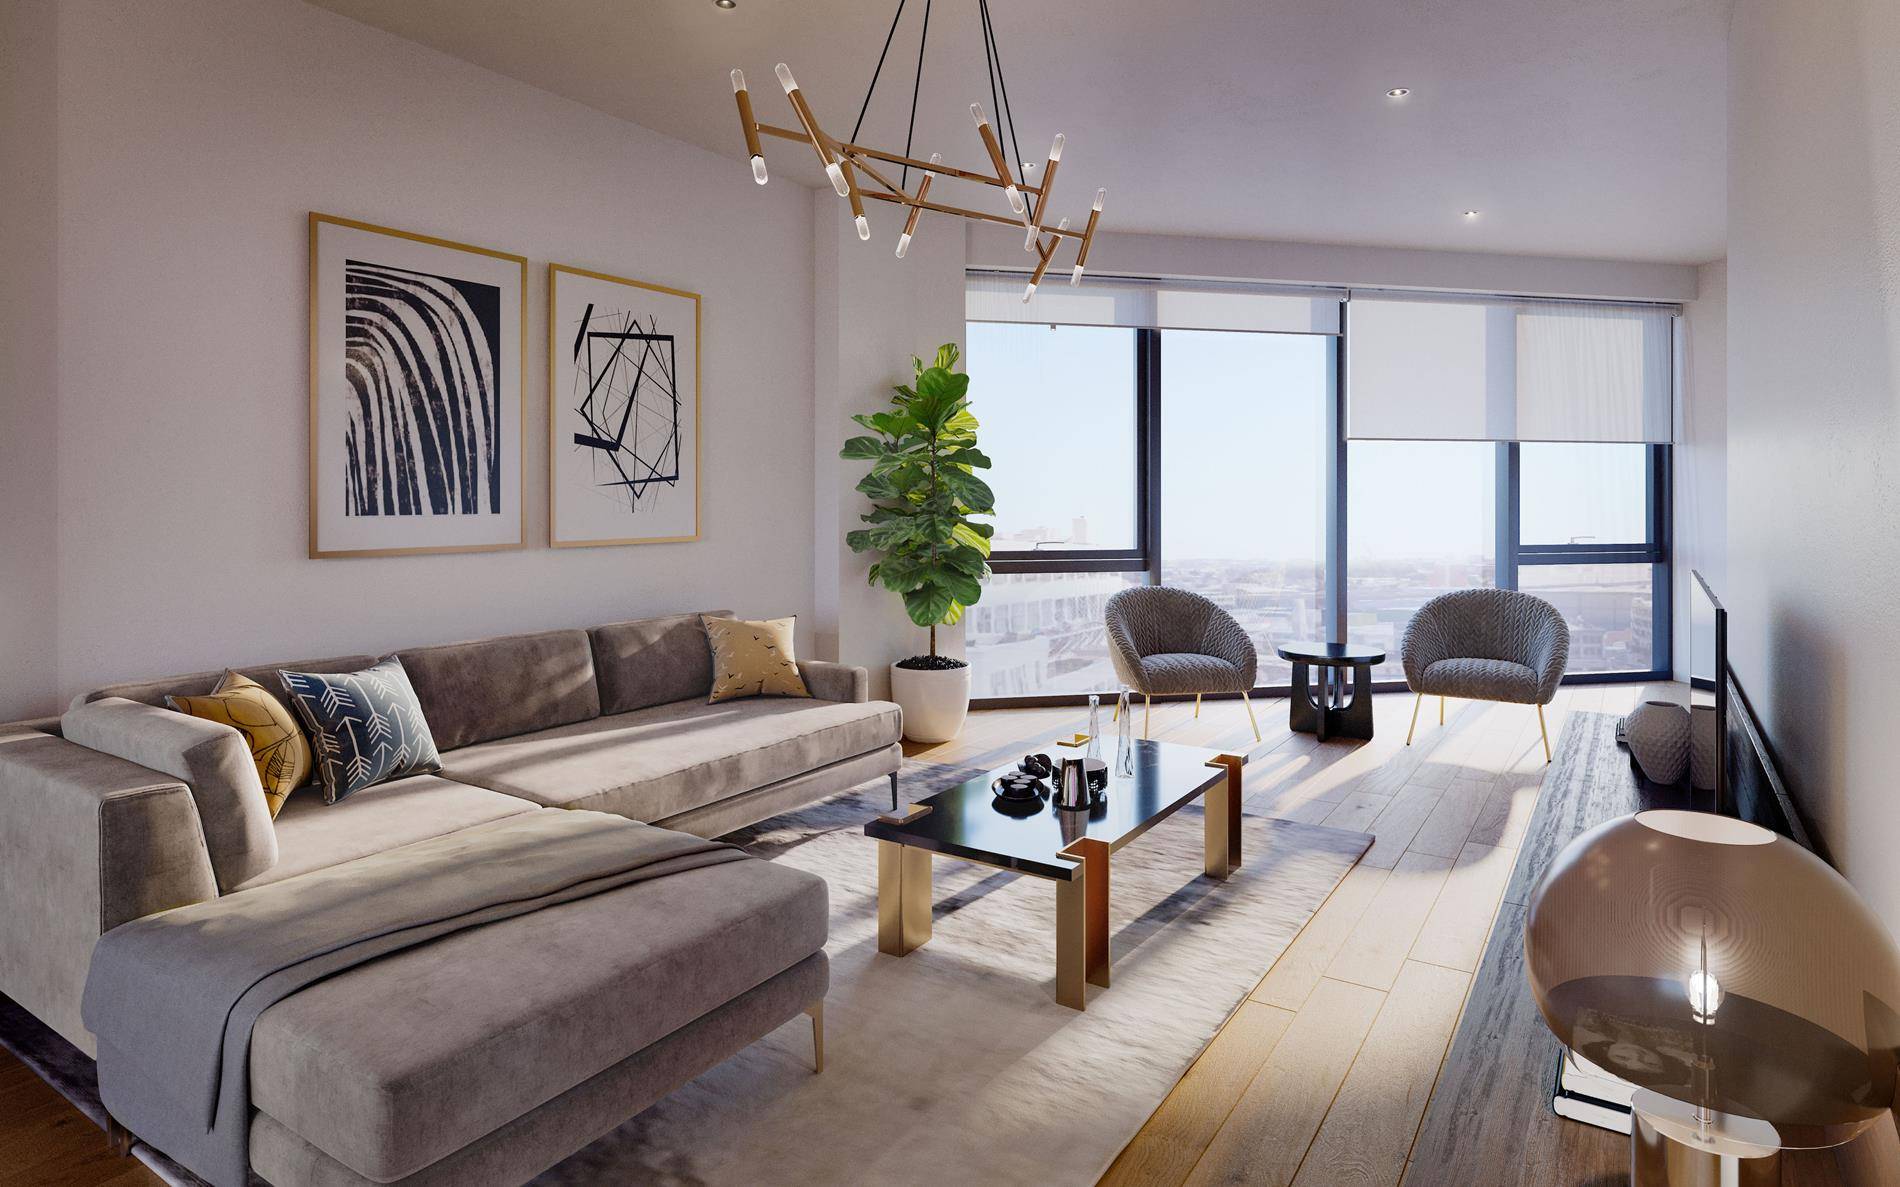 LIC's 1st Smart Home Condo INTERACTIVE VIRTUAL TOUR available please email us for details.